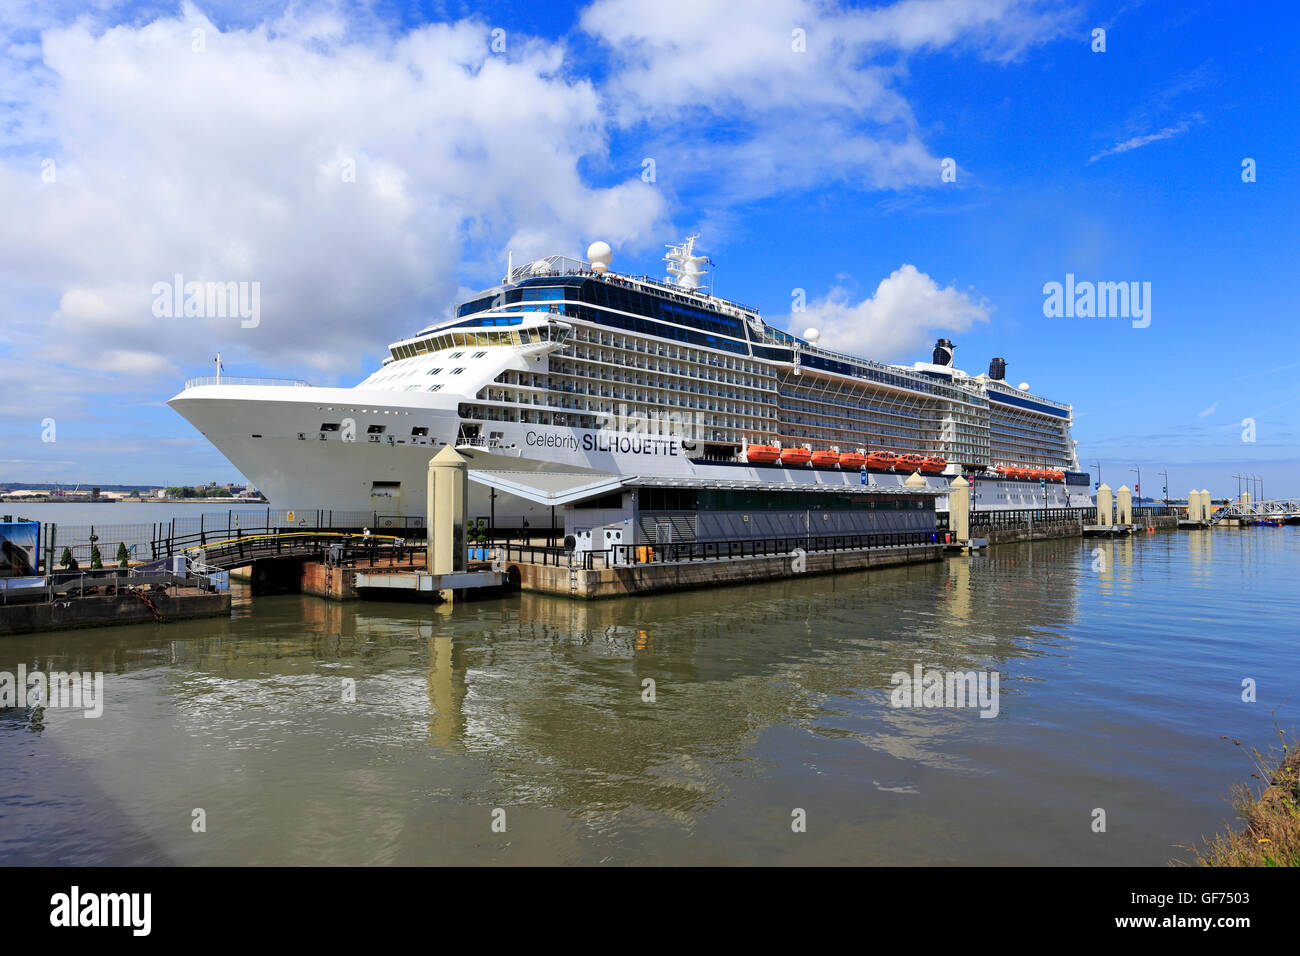 Celebrity Silhouette Cruise ship at the terminal Liverpool Merseyside England UK Stock Photo